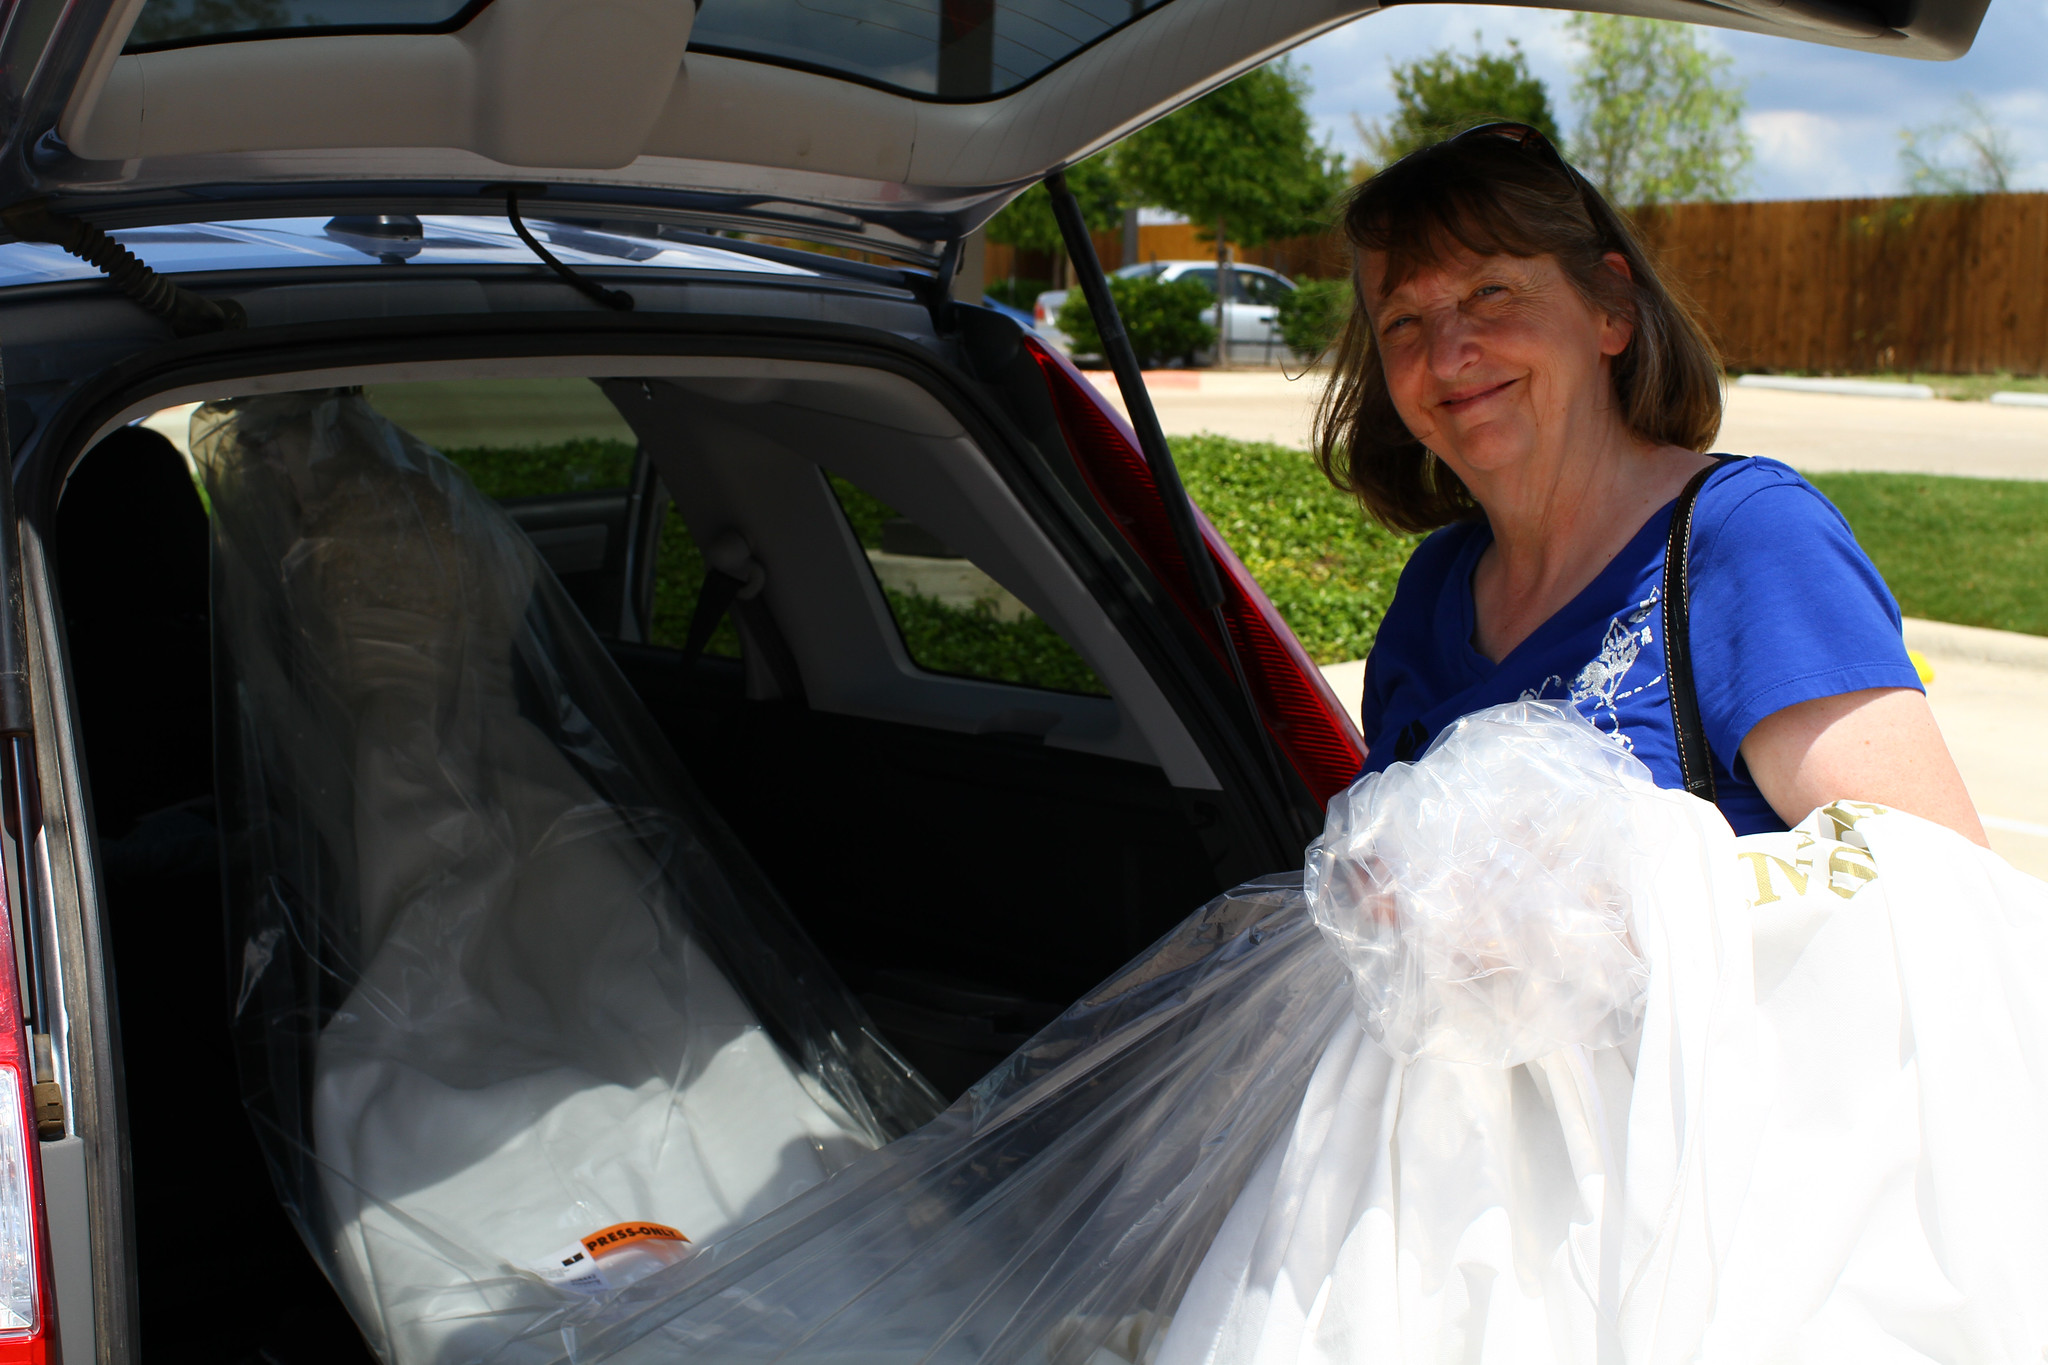 An elderly woman taking out a bridal dress from her car's trunk | Source: Flickr